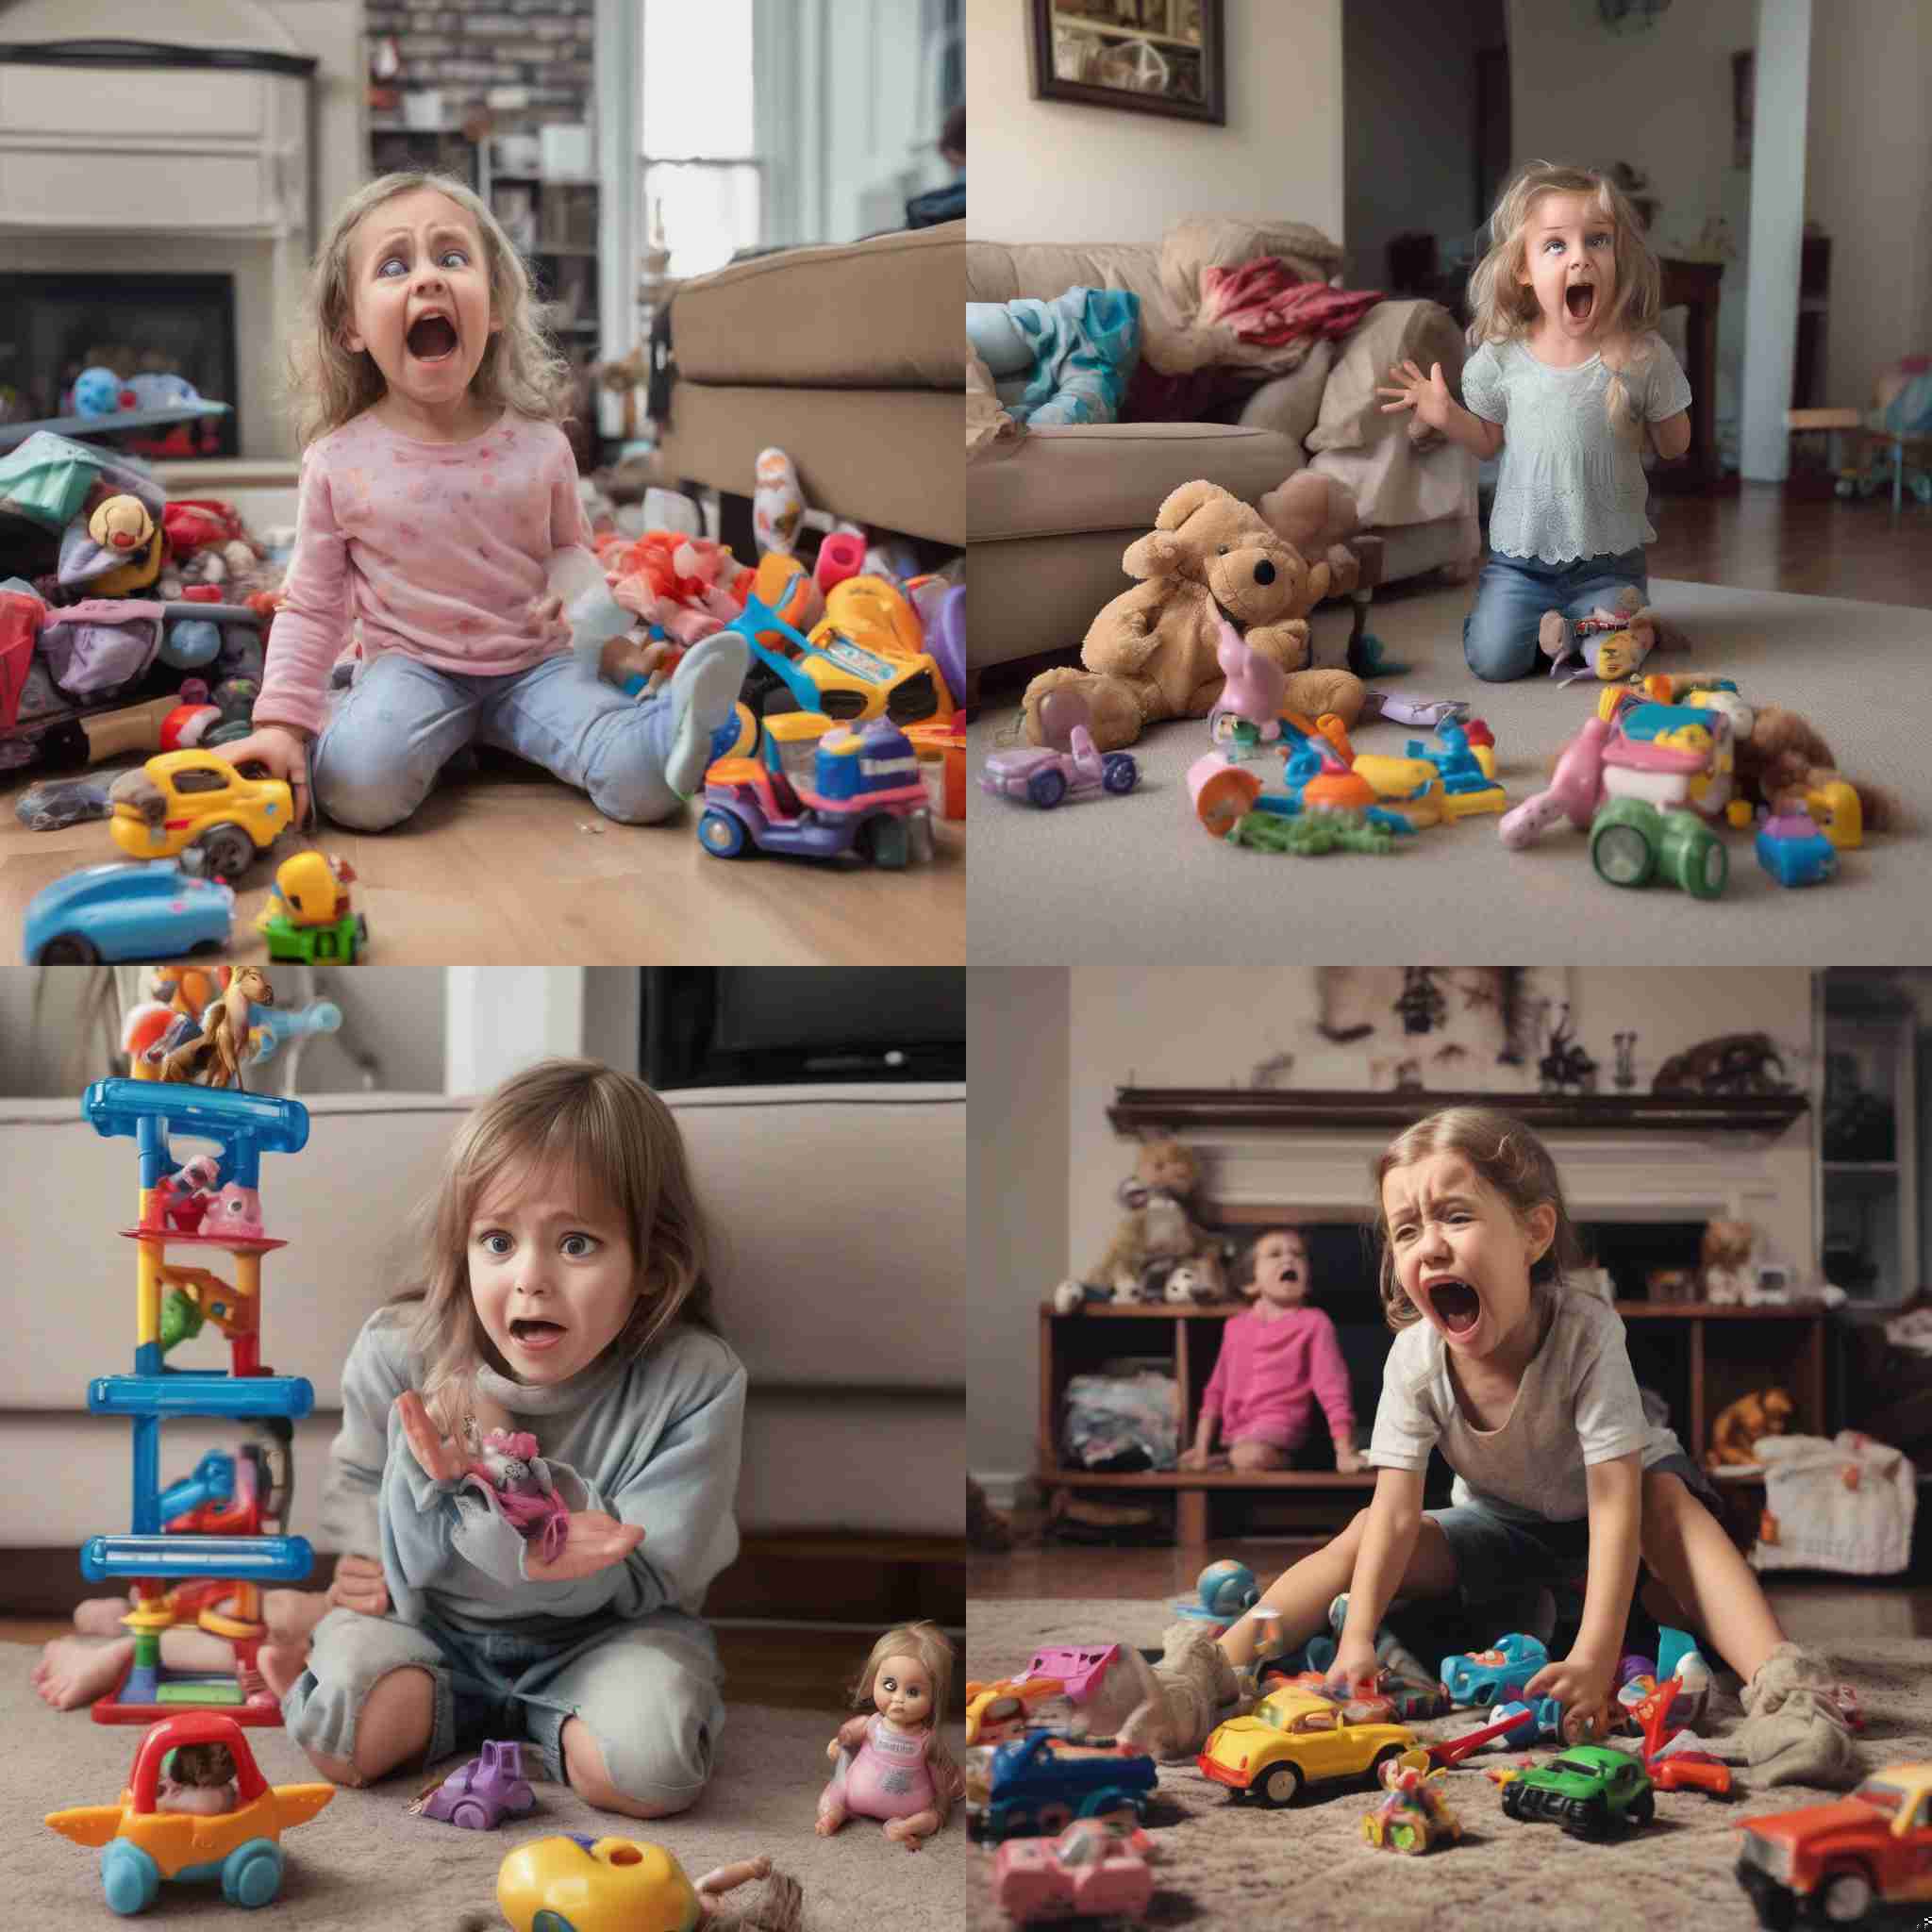 A child's reaction to her parent taking her toys away